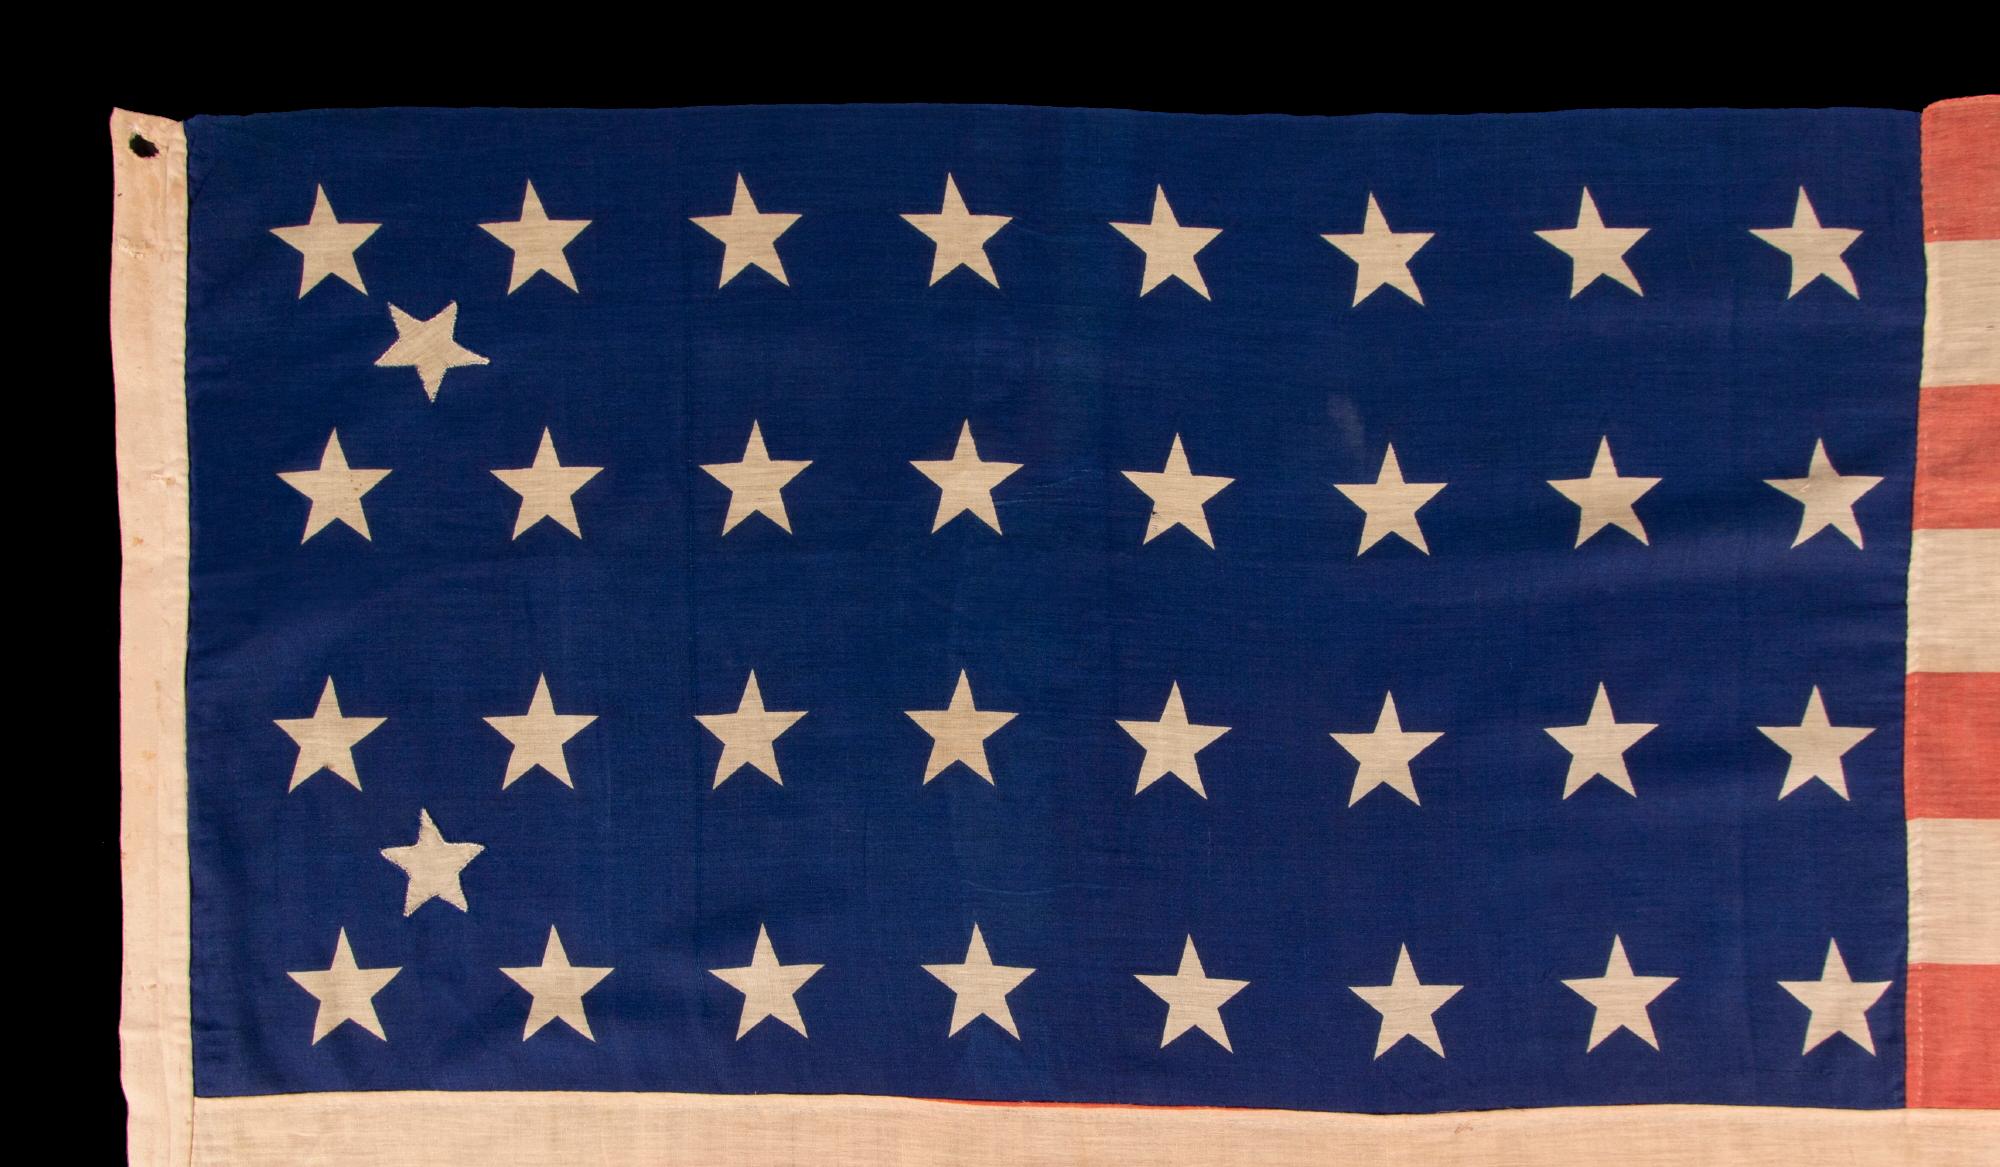 34 Star Antique American flag, Kansas Statehood, Civil War Period, ca 1861-1863 In Good Condition For Sale In York County, PA